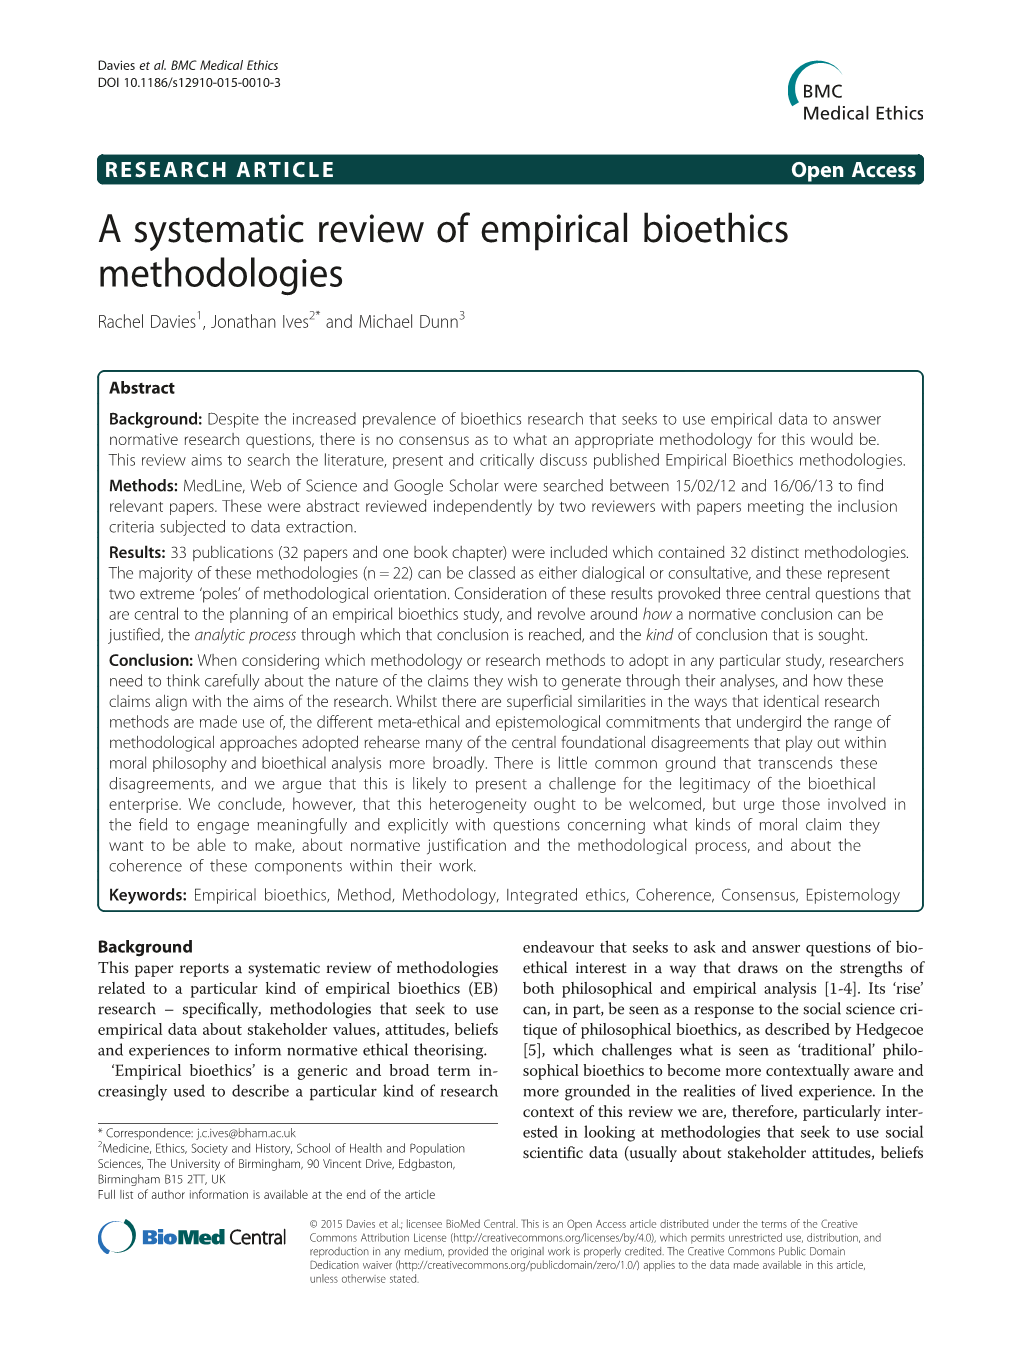 A Systematic Review of Empirical Bioethics Methodologies Rachel Davies1, Jonathan Ives2* and Michael Dunn3